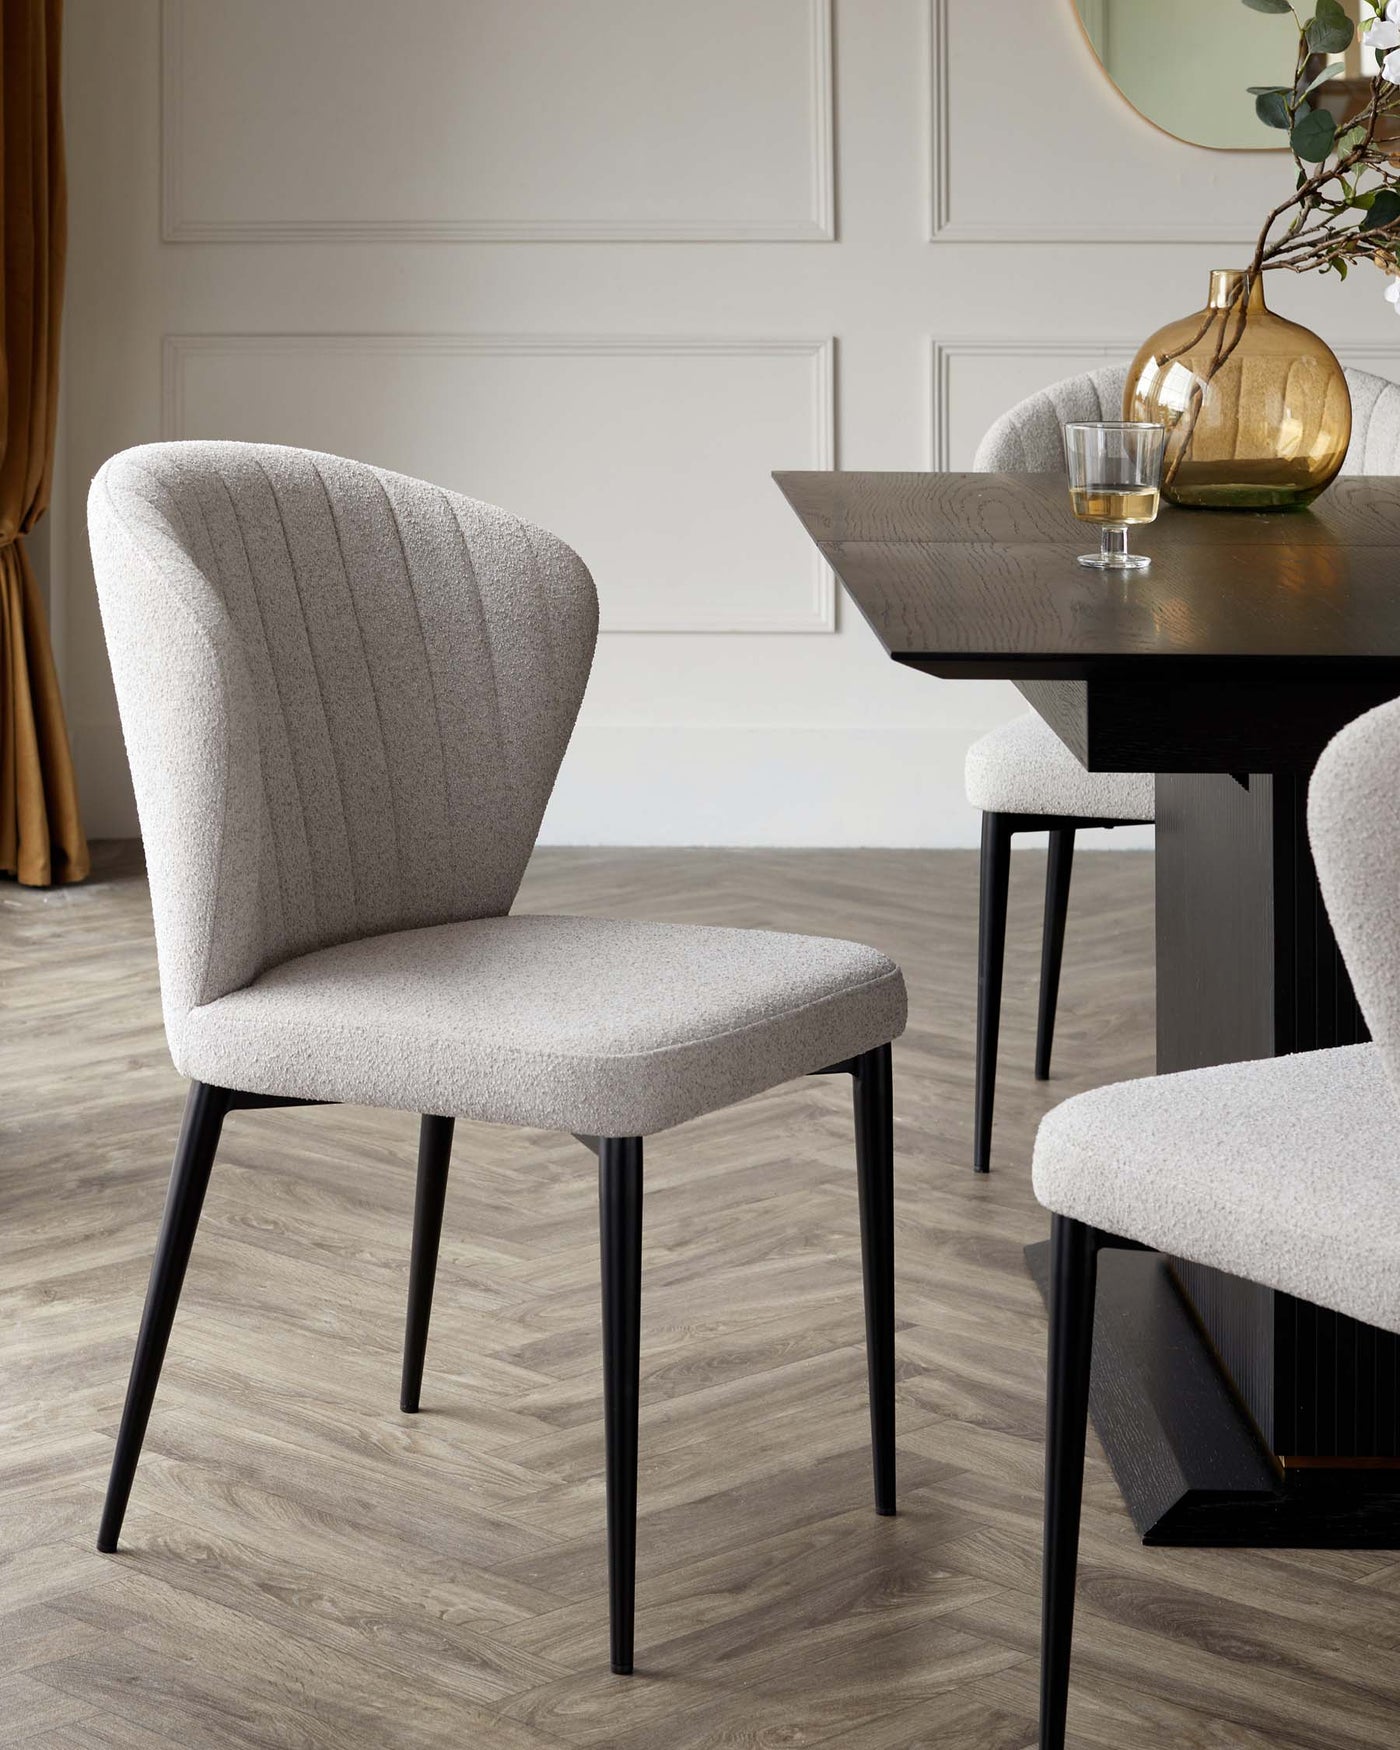 Elegant dining chair with textured light grey upholstery and a curved, high-back design on tapered black legs. Dark wooden dining table with prominent wood grain texture visible, hosting a decorative vase and a glass of a drink. The setting suggests a sleek, modern aesthetic.